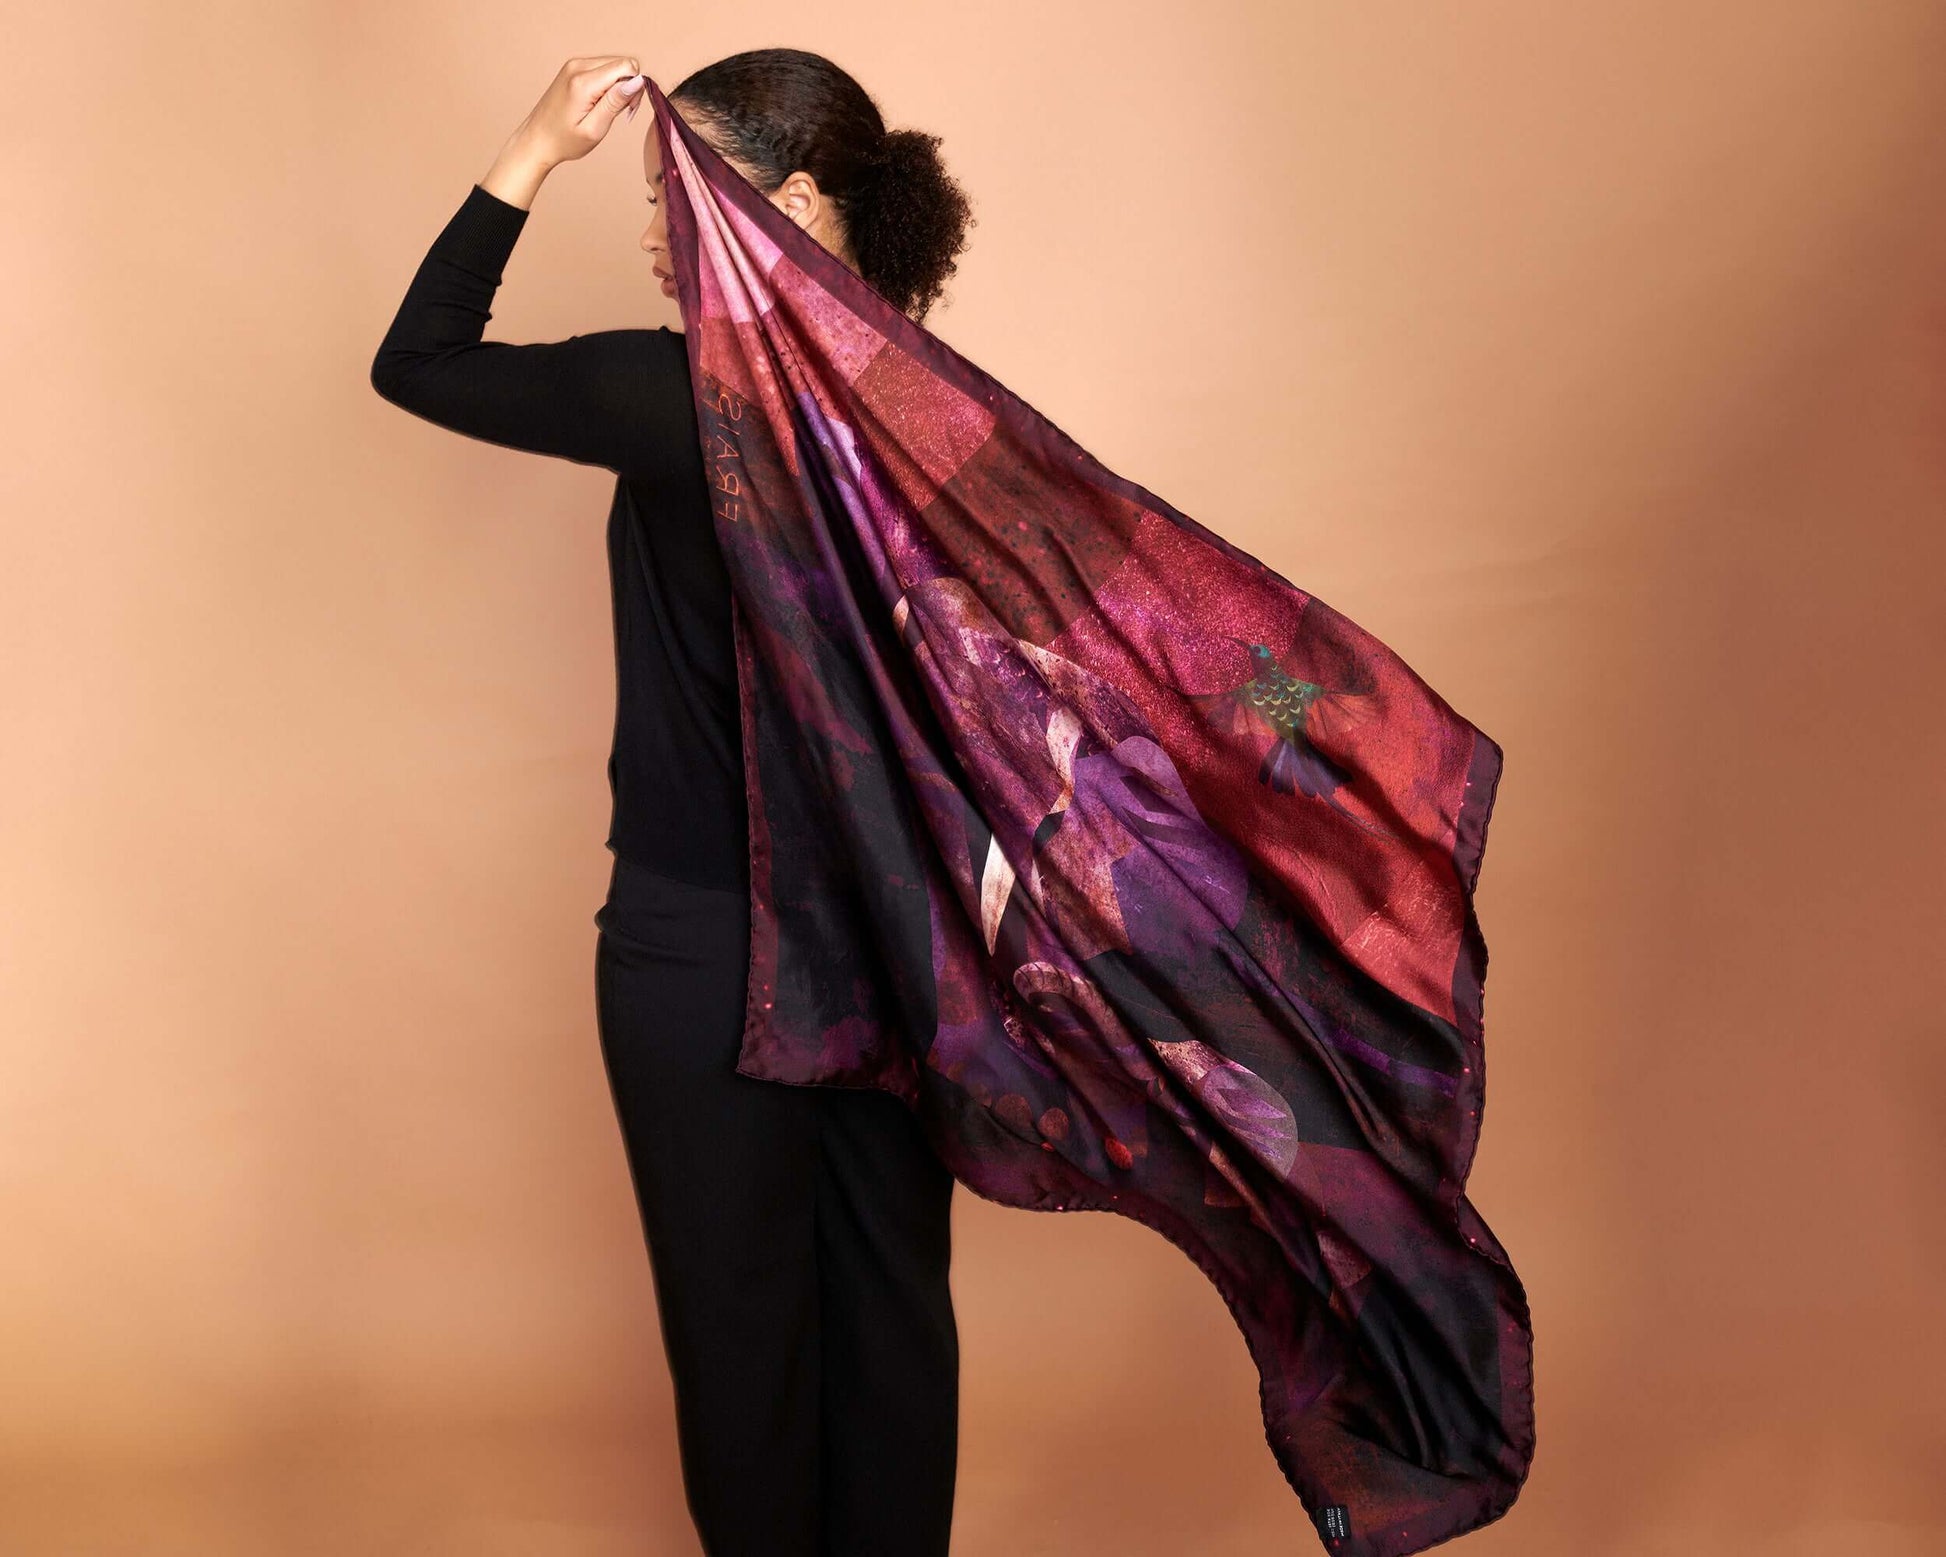 Silk Twill Scarf, Elephant and Calf Print, Rose Violet, Bordeaux and Plum Hues, Original Design, Made In Italy